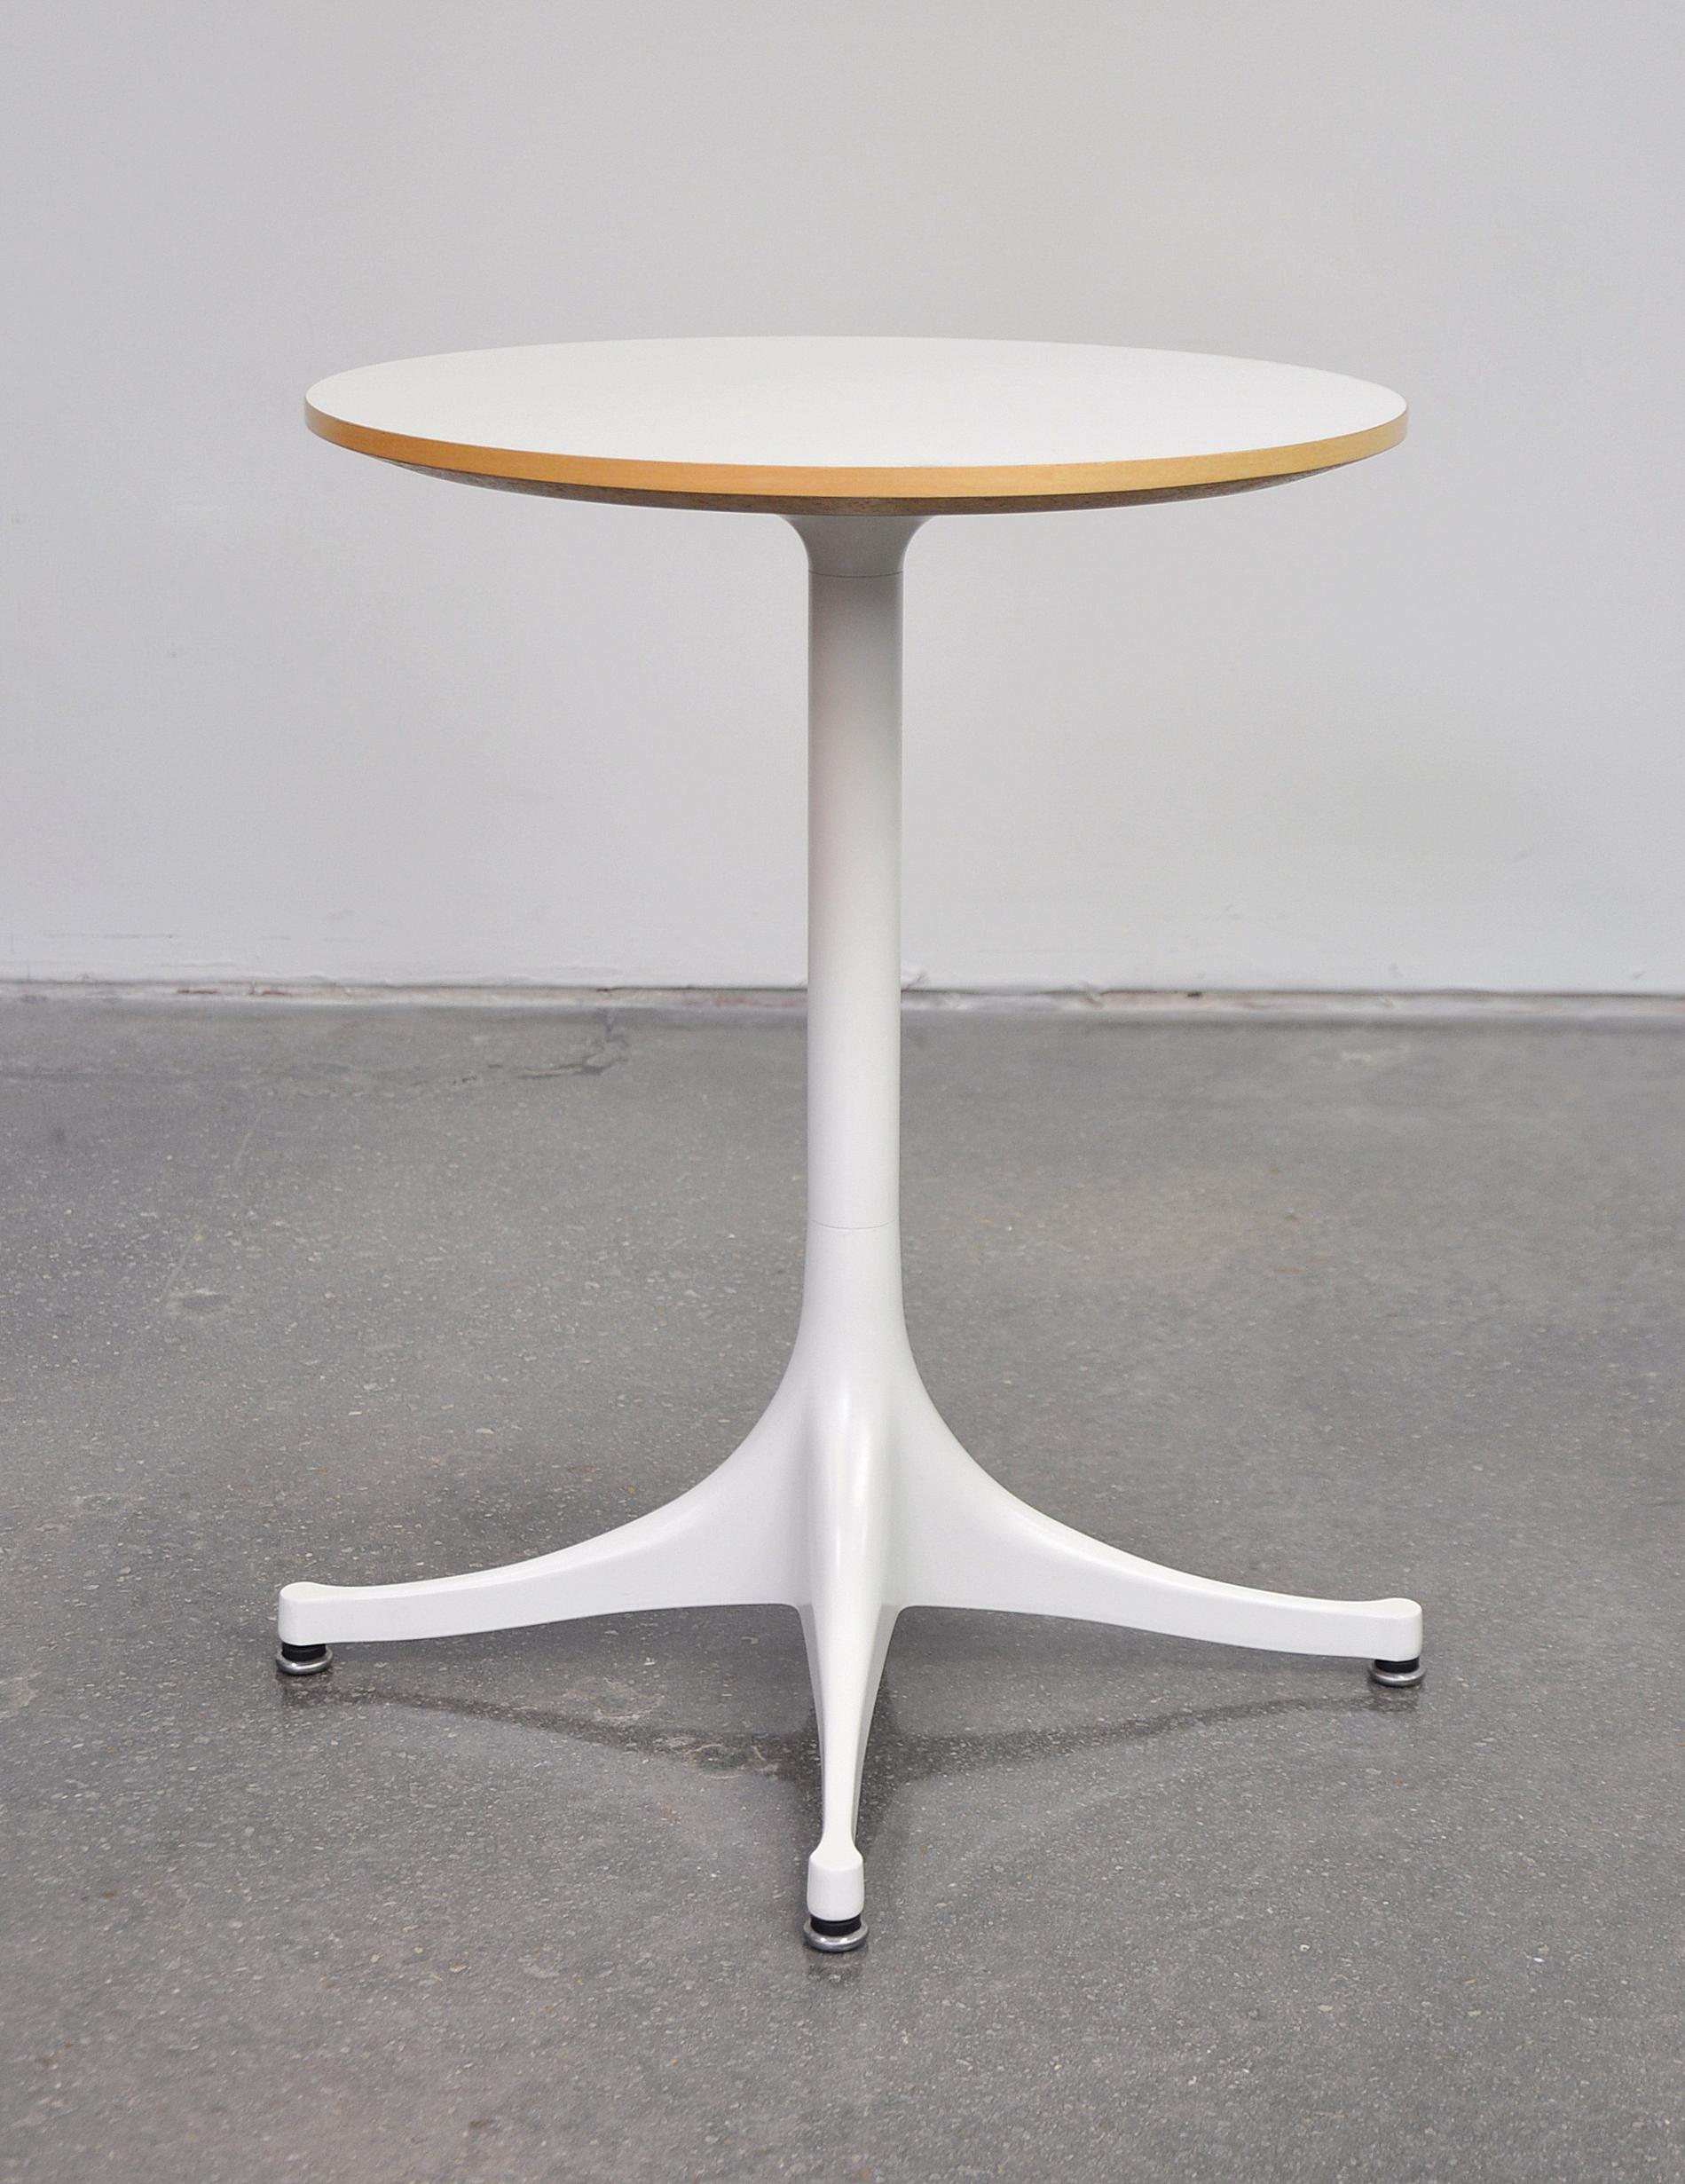 Classic Mid-Century Modern round end table with white powder-coated aluminium base with self-levelling glides and a white top with maple edge. First designed by George Nelson for Herman Miller in 1954, of simple and elegant form, this table can be